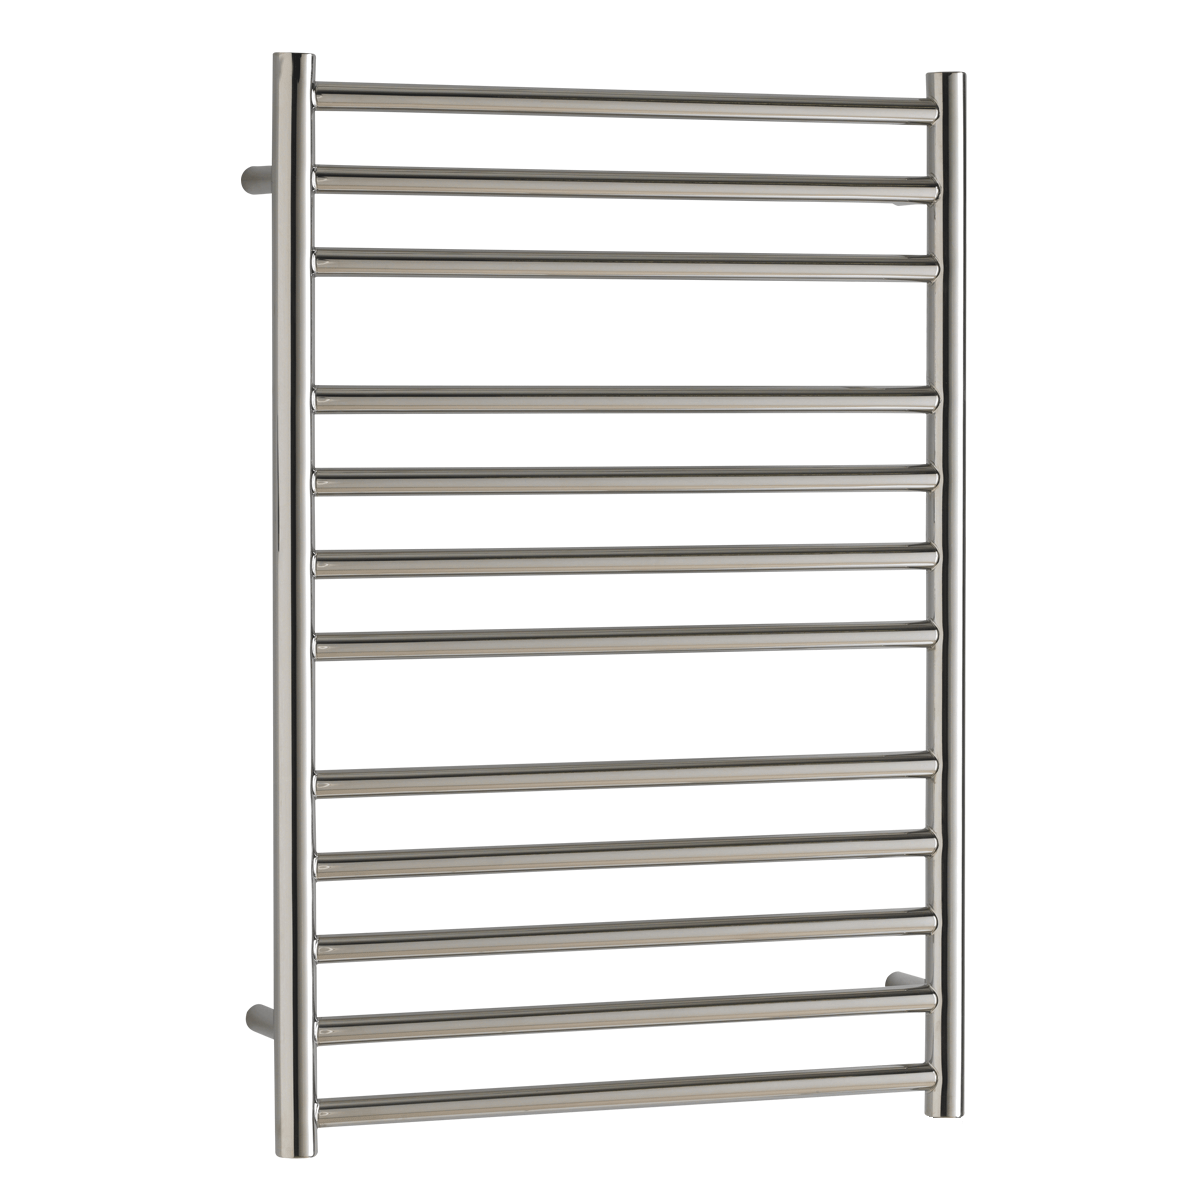 Aura Steel Stainless Steel Smart Electric Towel Rail with Thermostat, Timer + WiFi Control Efficient Heating, Well Made, Excellent Value Buy Online From Solaire Quartz UK Shop 11